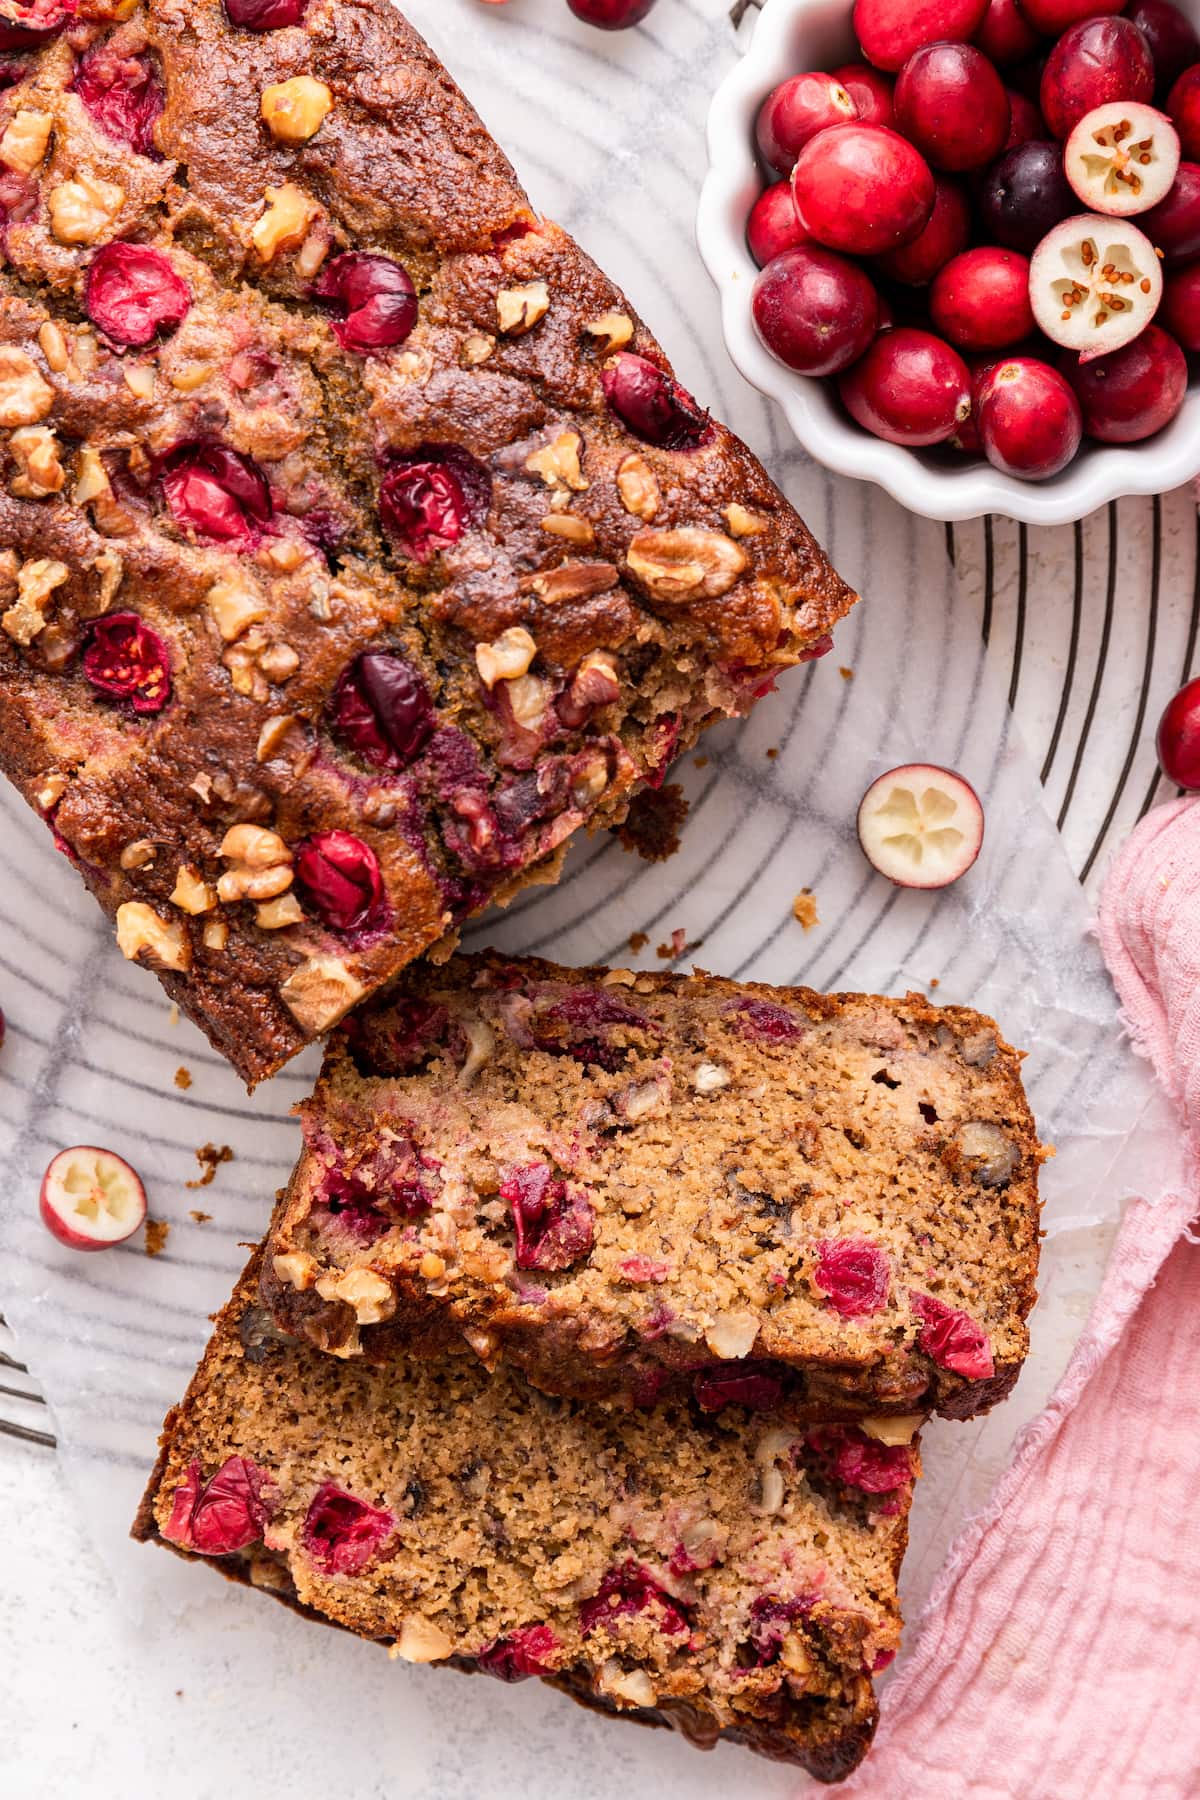 Two slices of cranberry banana bread near the loaf of bread.